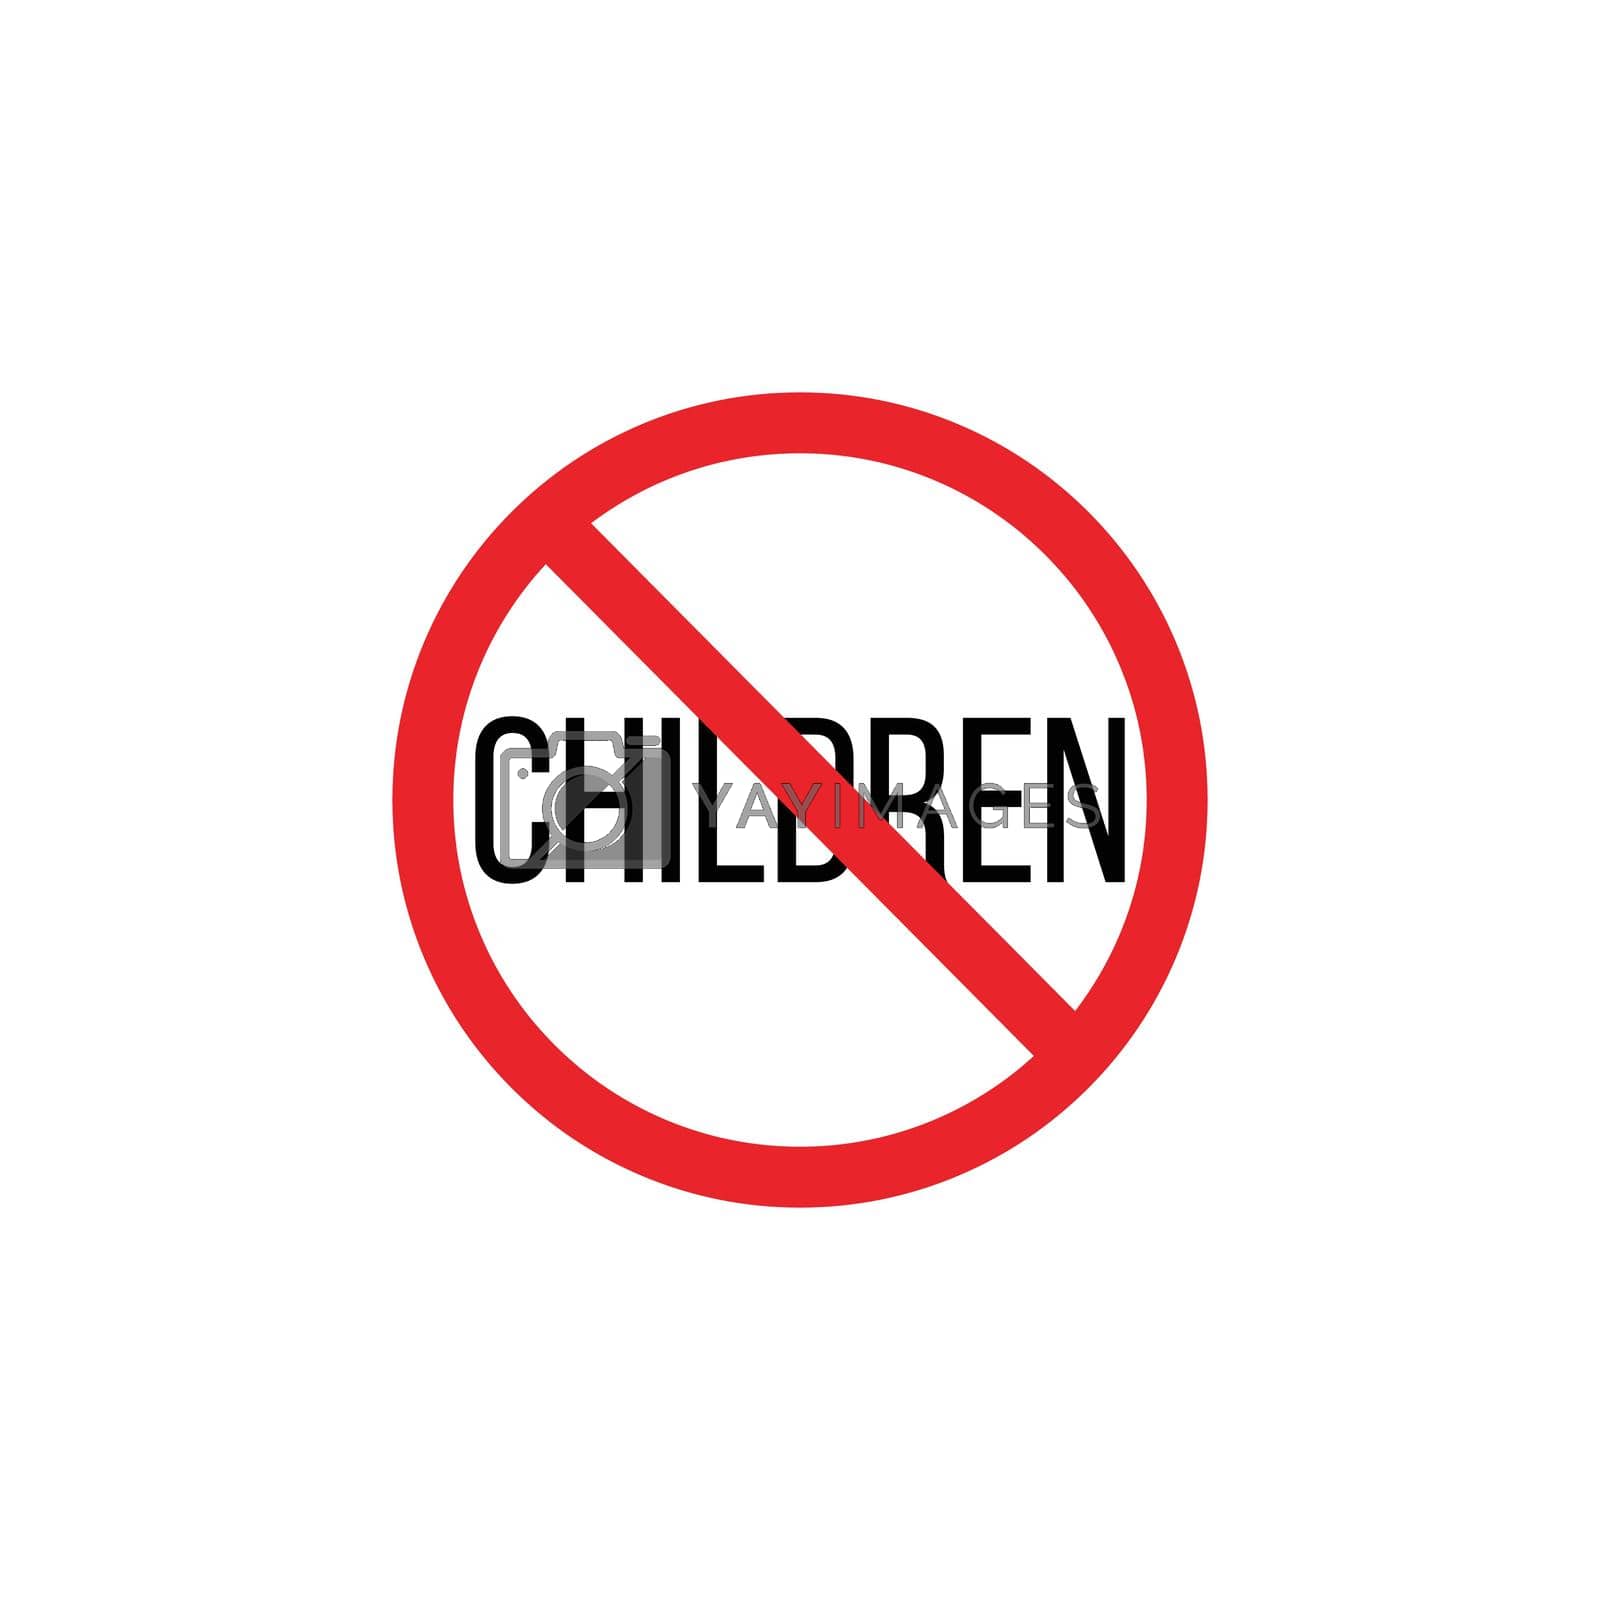 Children are prohibited Stop or ban sign . Kid is not allowed image. Babies are banned. Stock Vector illustration isolated